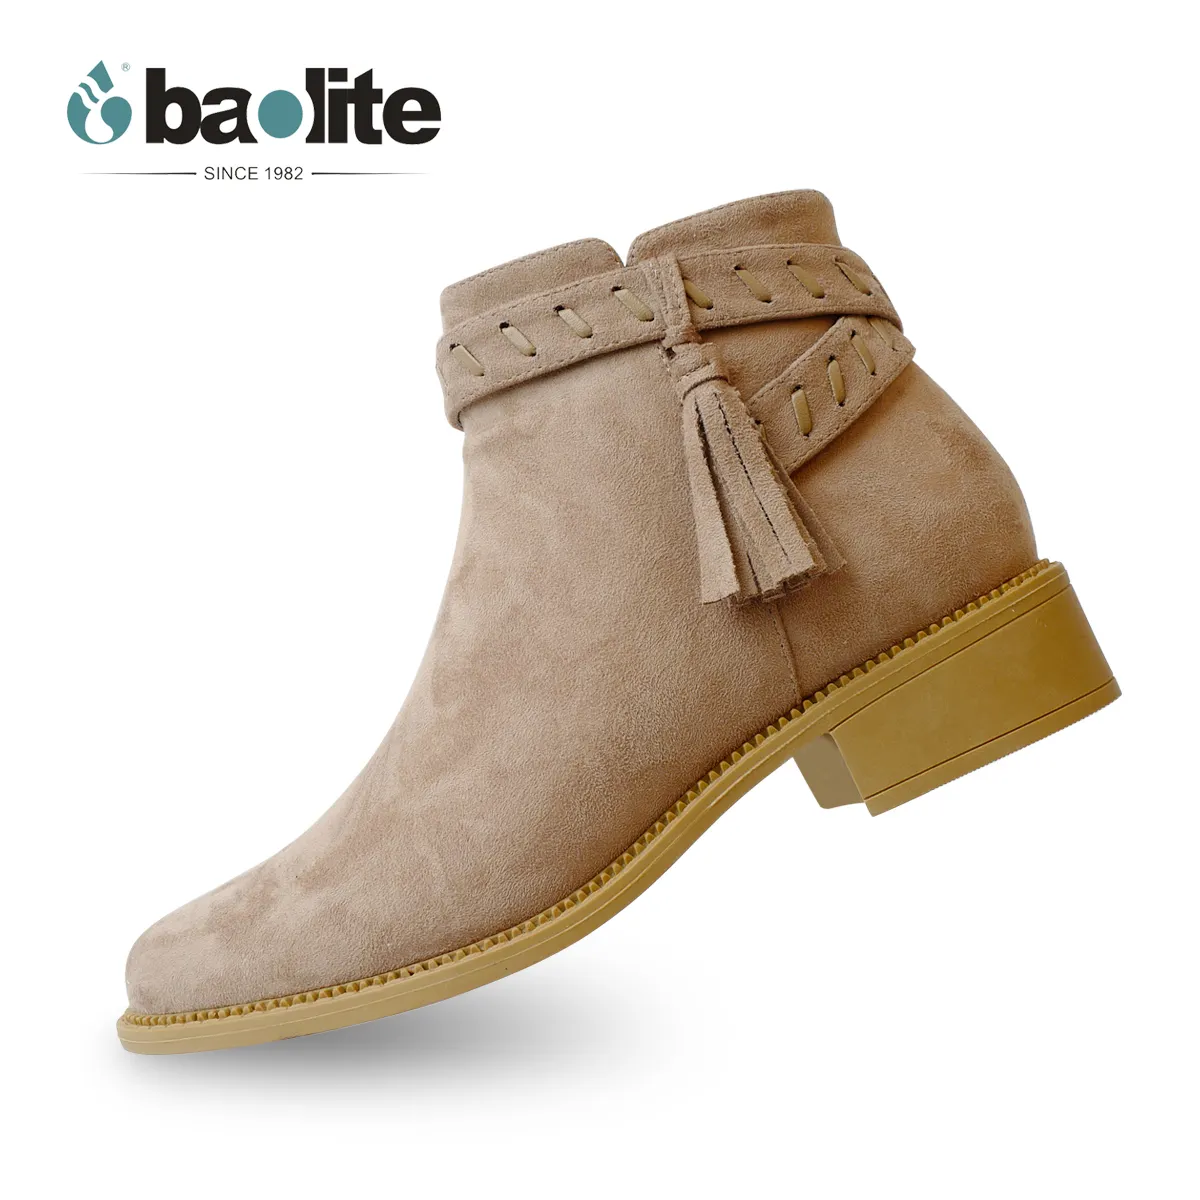 Baolite Elegant lady gentle style women's boots ankle boots with tassel